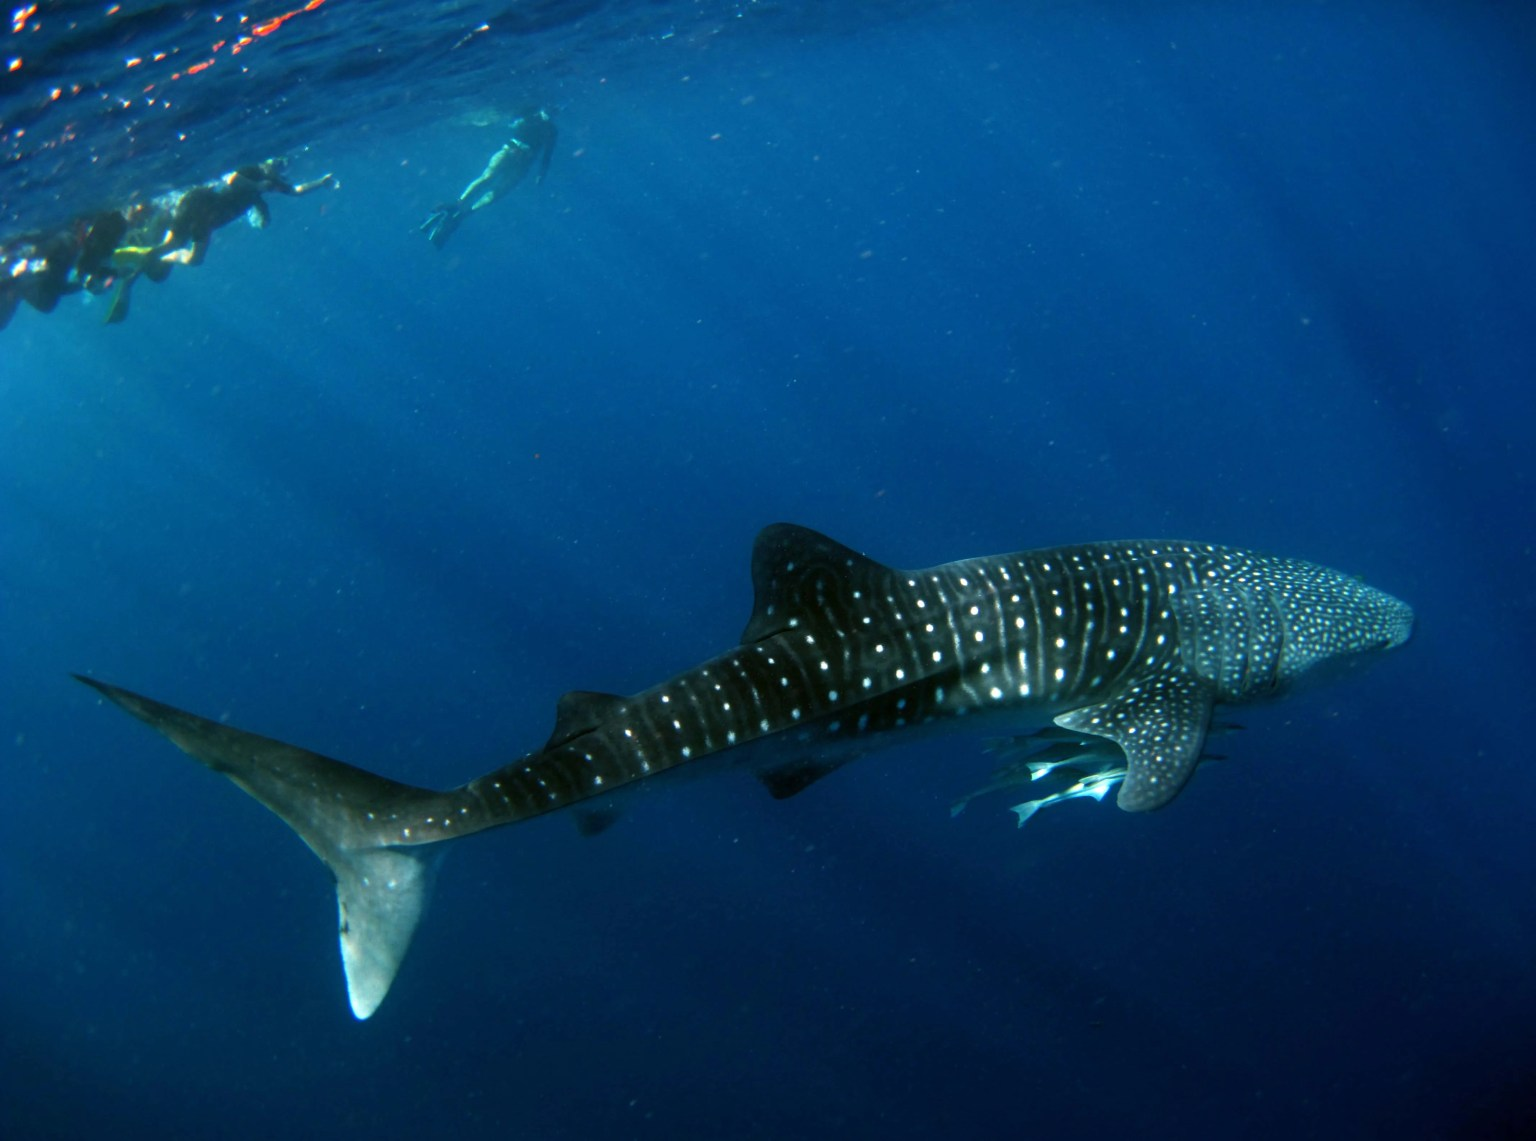 A white-spotted whale shark swims in a blue ocean.